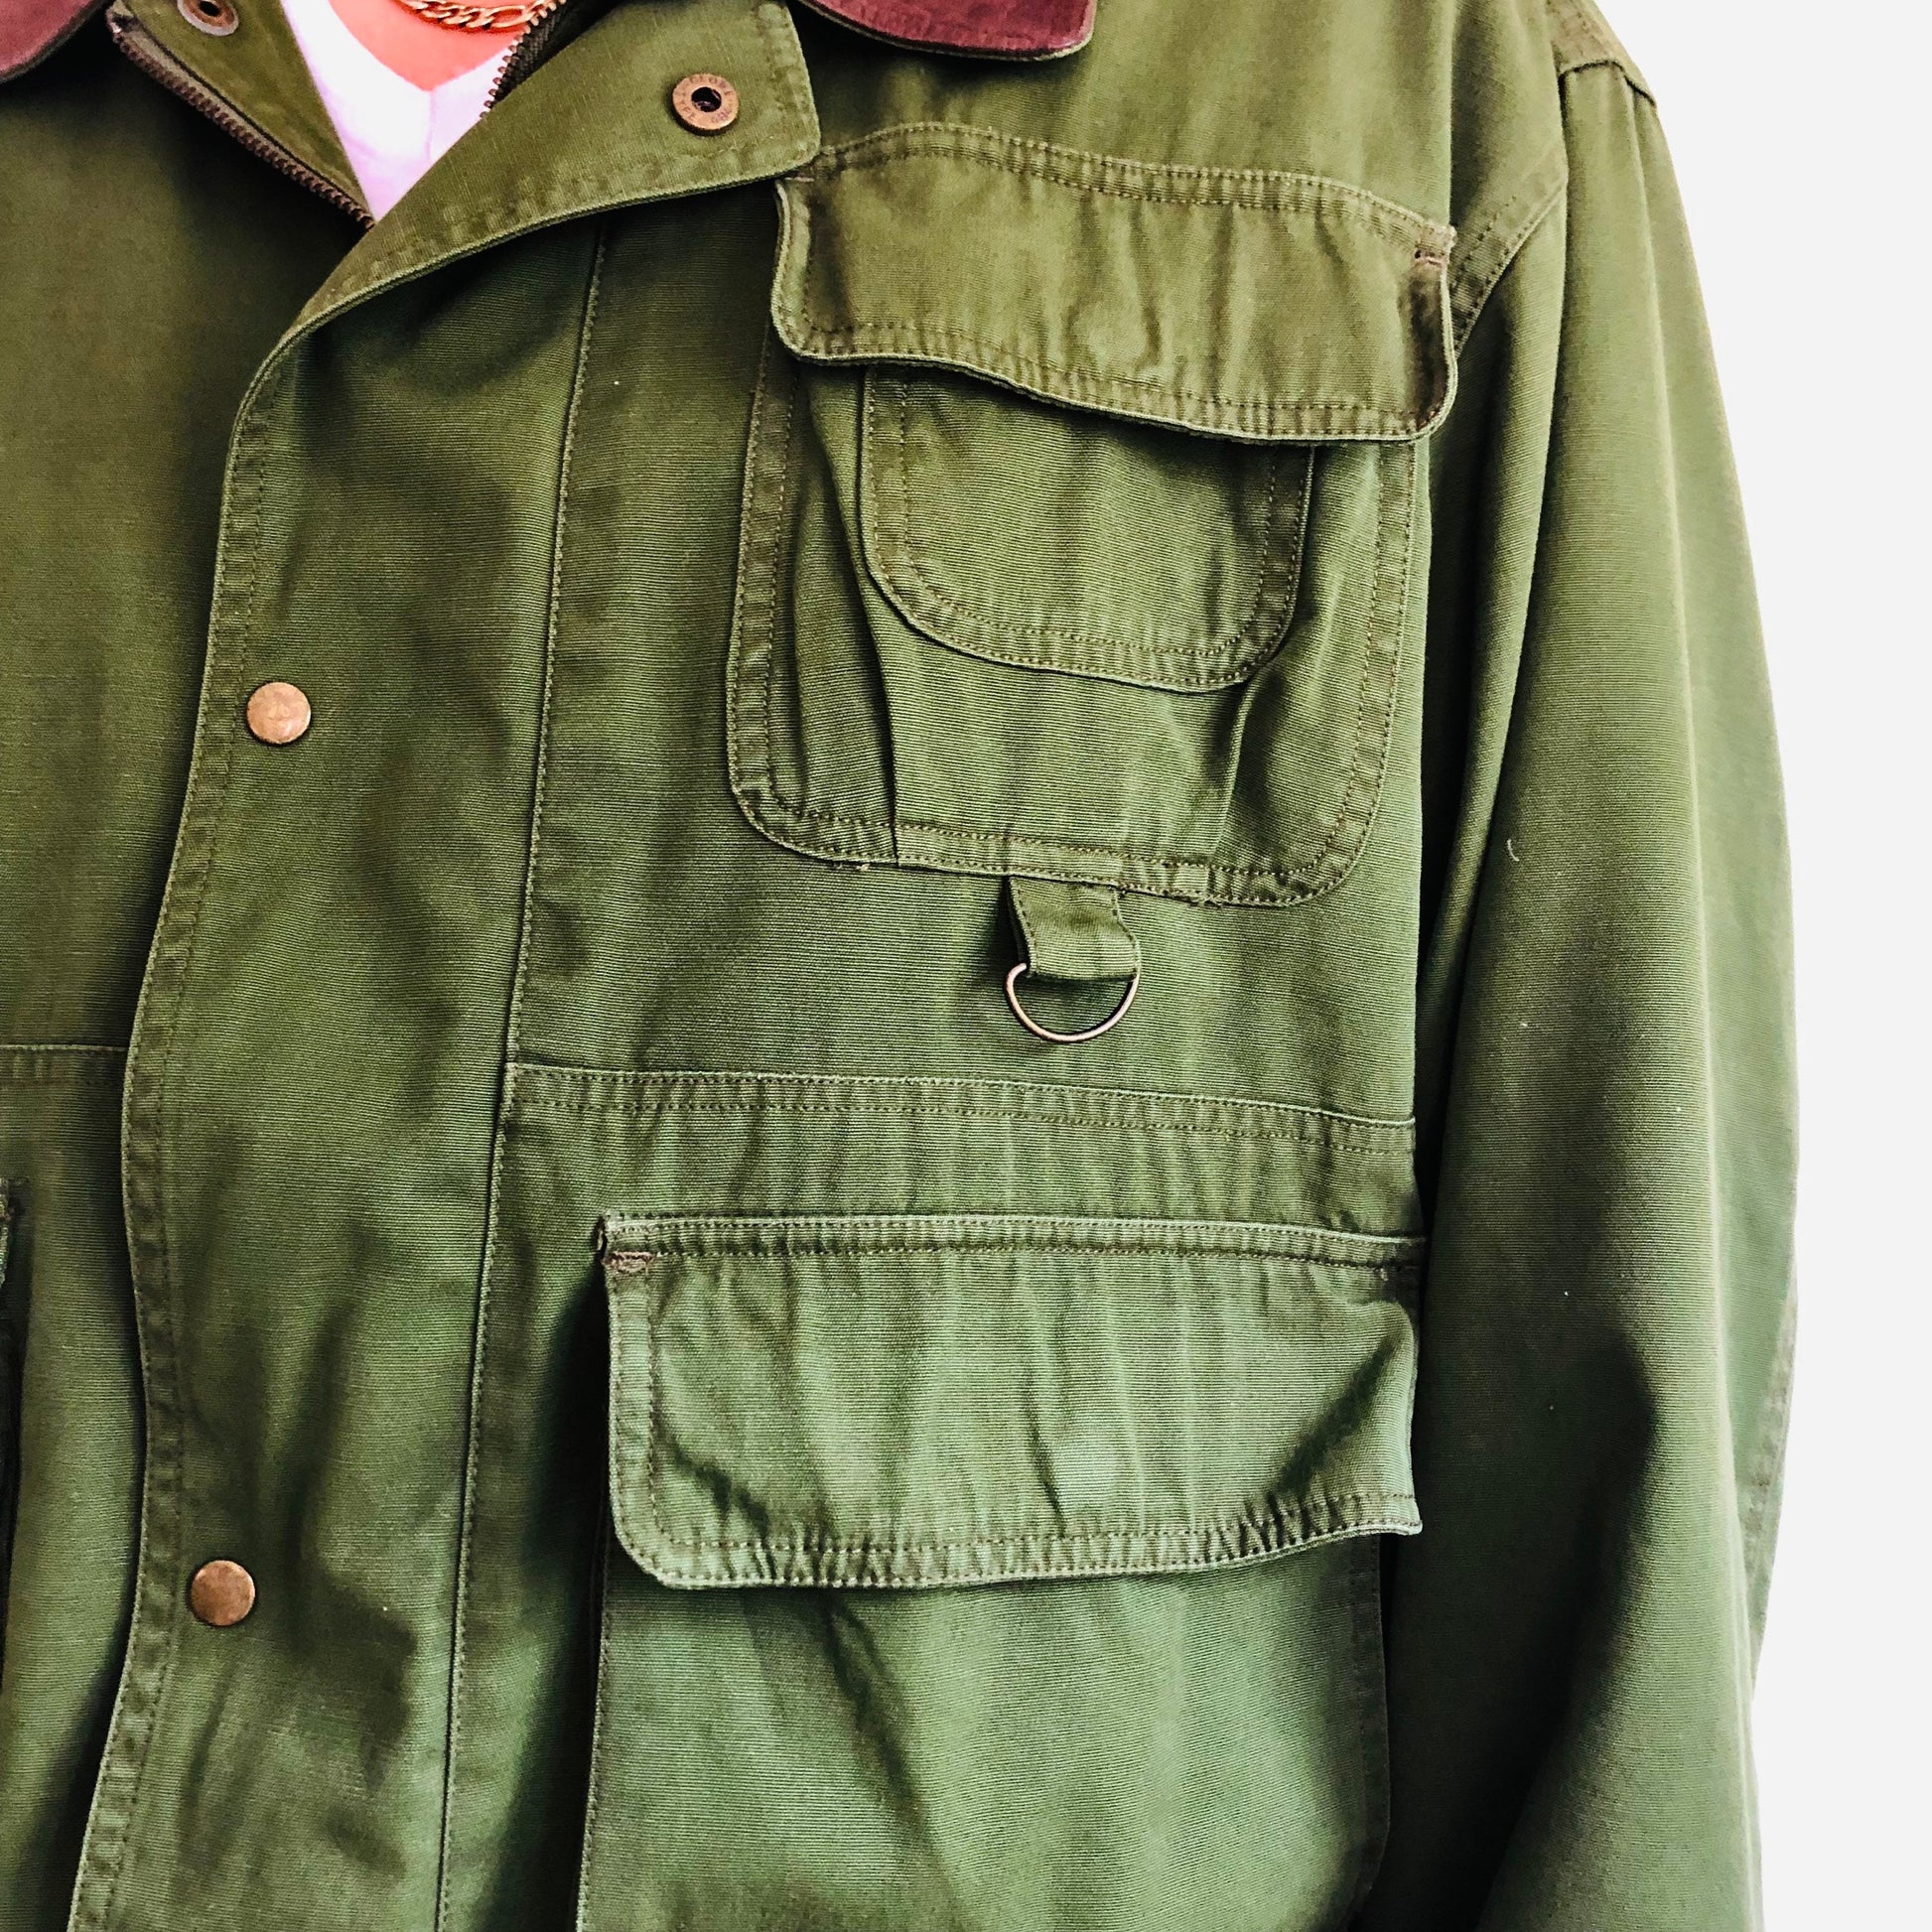 90's Vintage Green Canvas & Leather Utility Hunting Jacket // Size Large